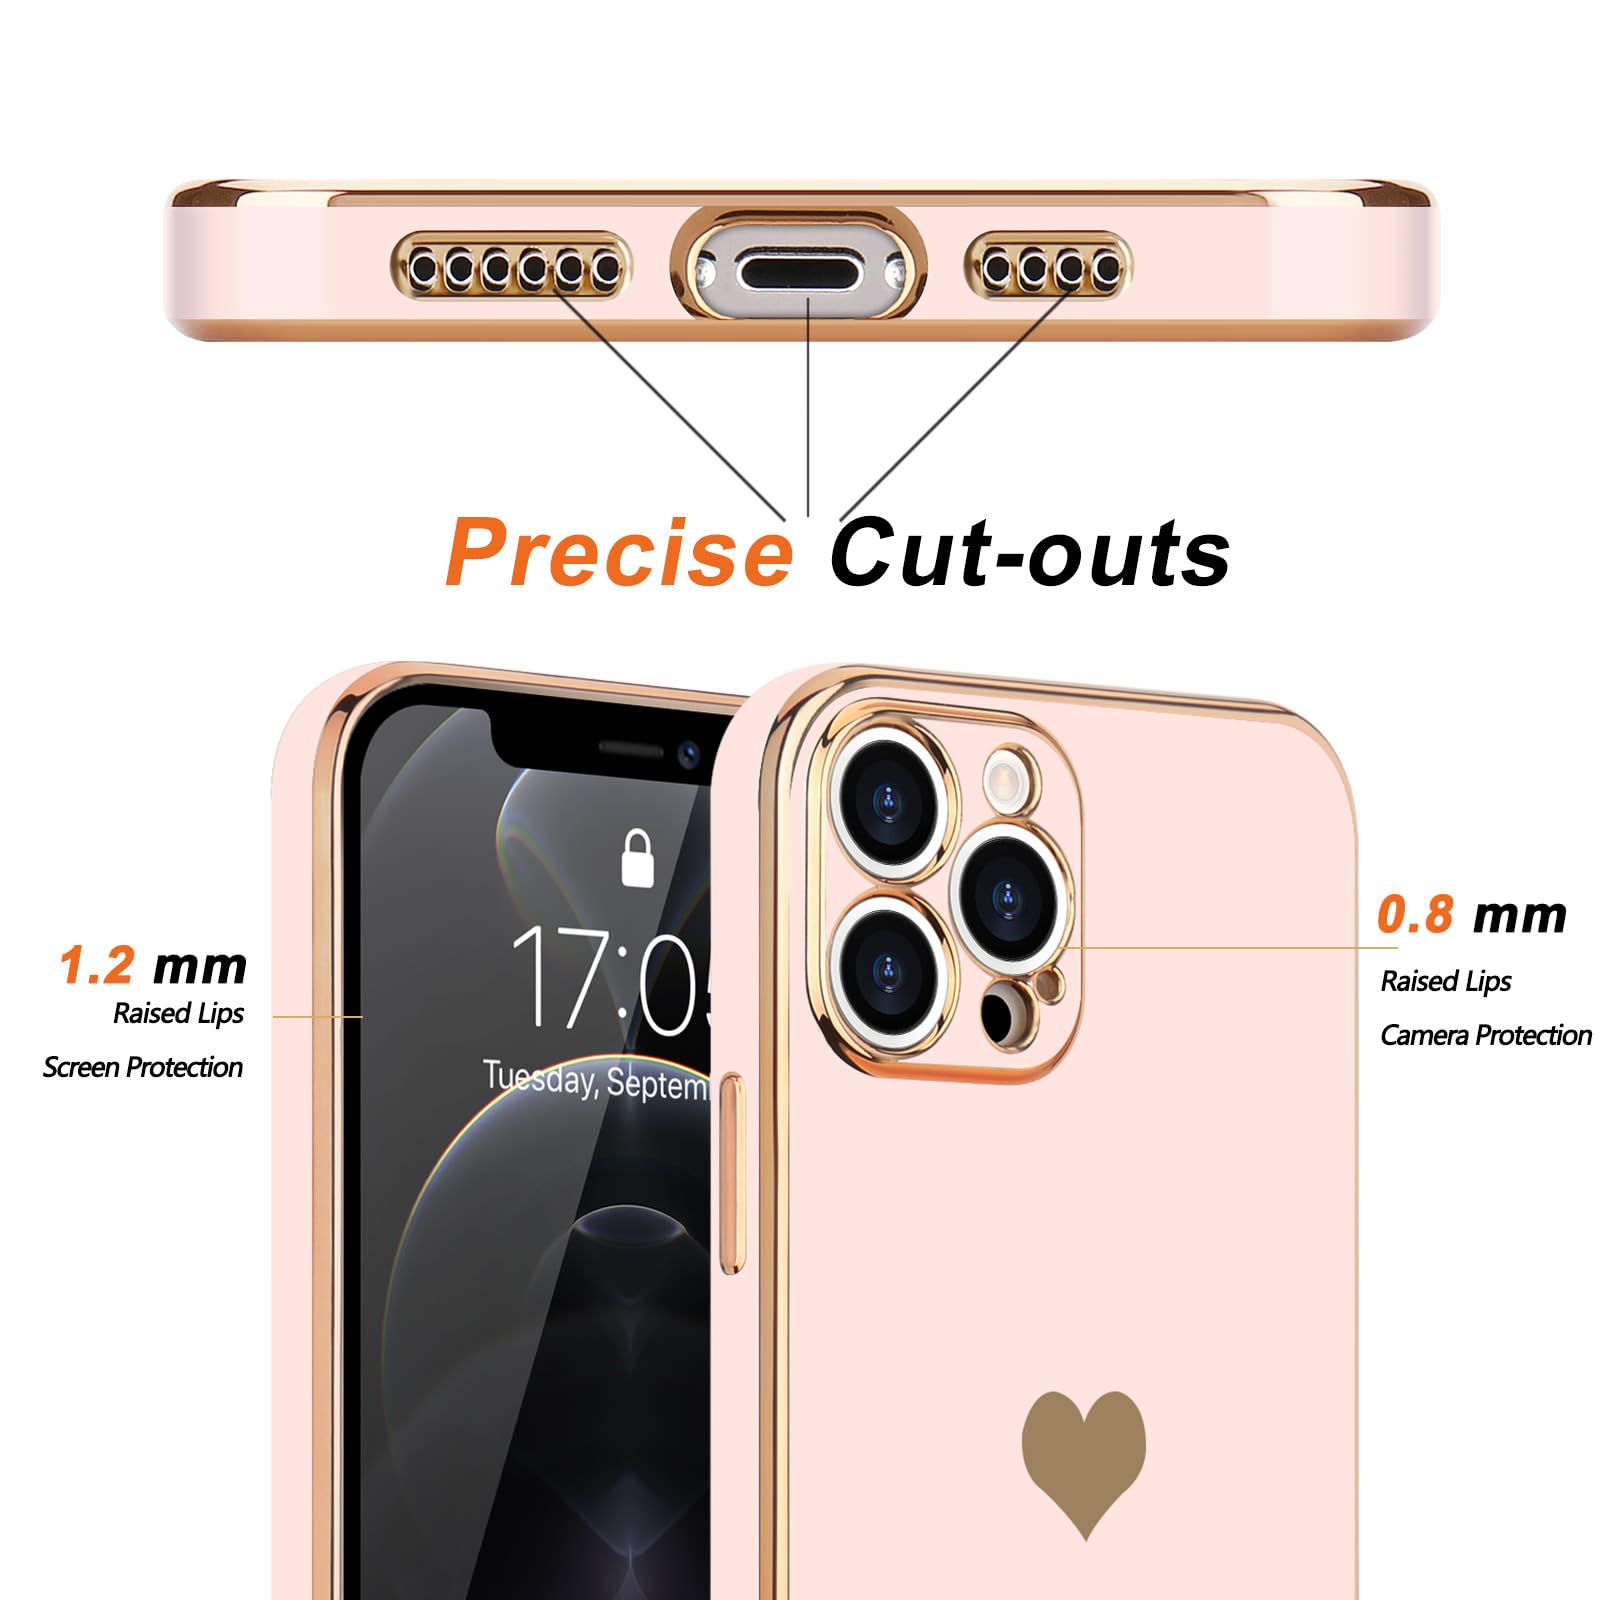 Teageo for iPhone 12 Pro Case for Women Girl Cute Love-Heart Luxury Bling Plating Soft Back Cover Raised Full Camera Protection Bumper Silicone Shockproof Phone Case for iPhone 12 Pro, Light Pink